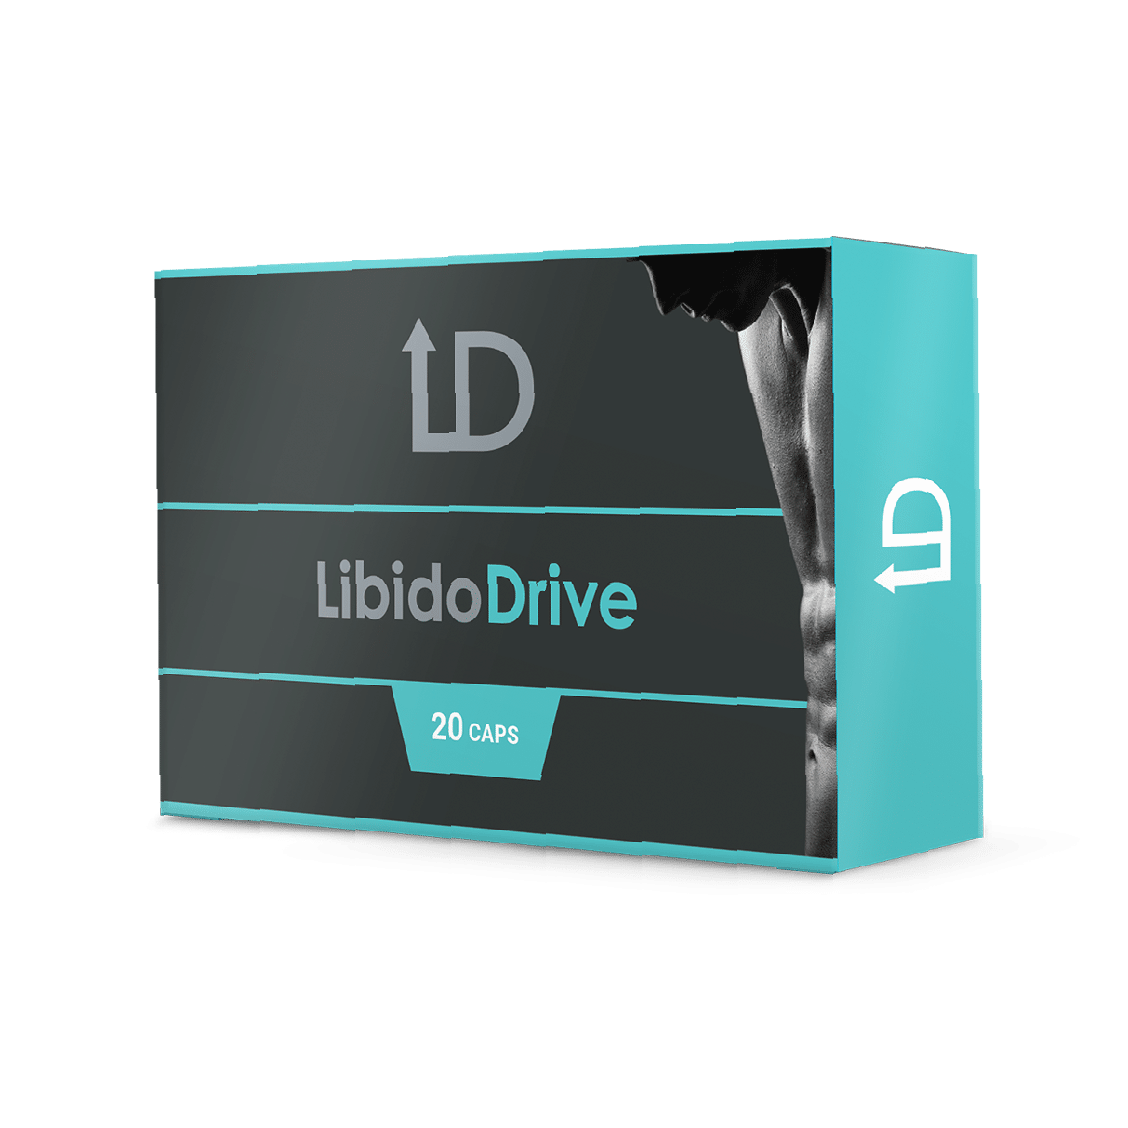 Libido Drive - what is it